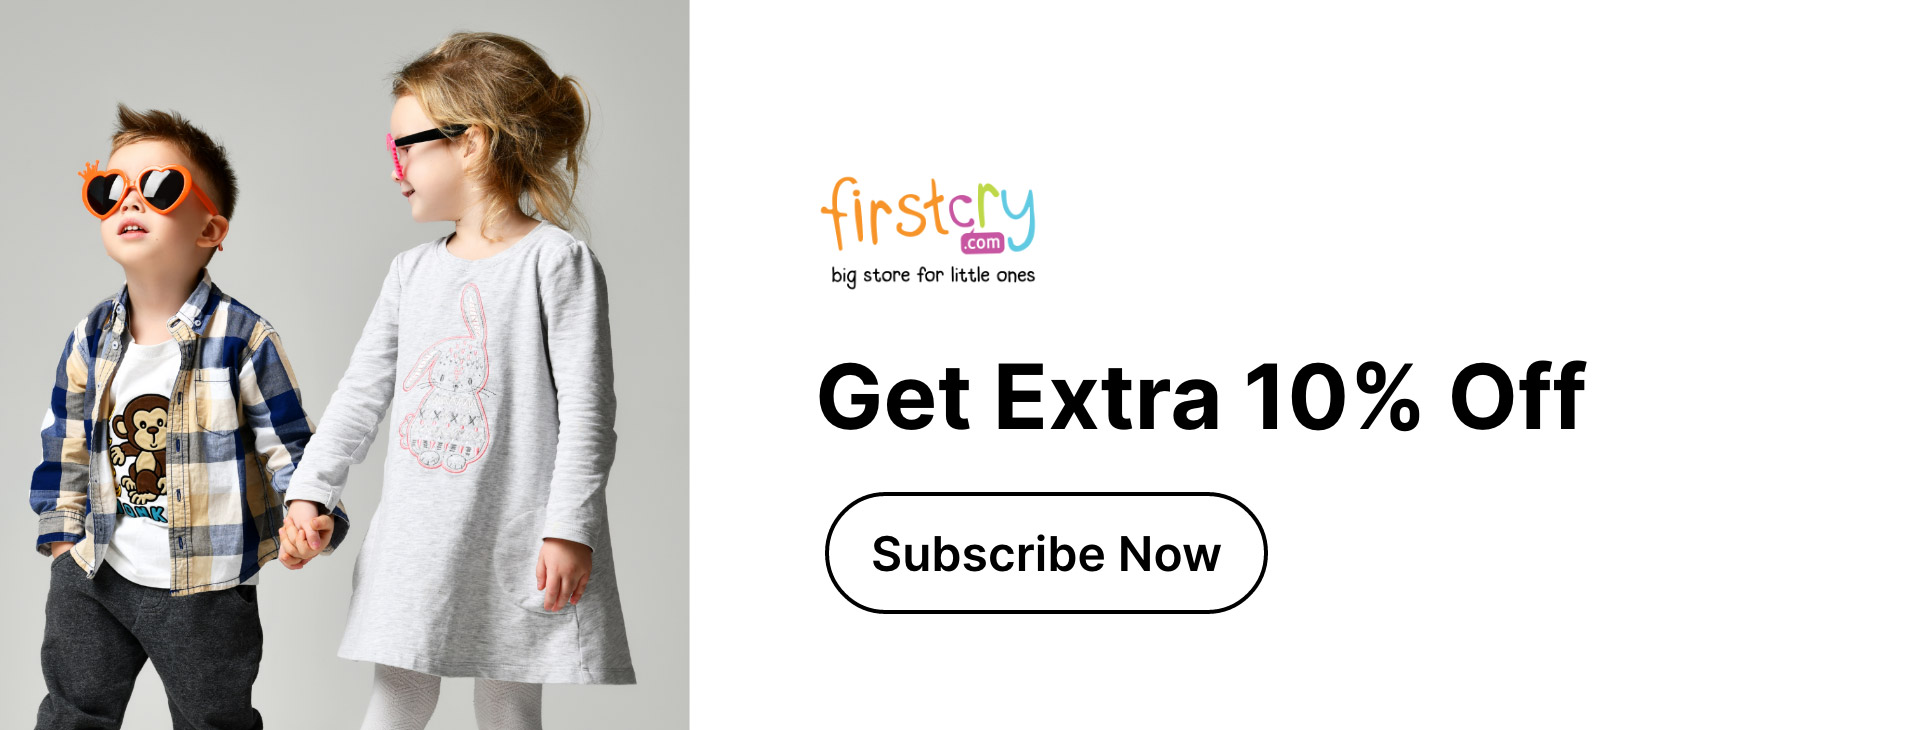 Get 10% Extra Discount on Firstcry